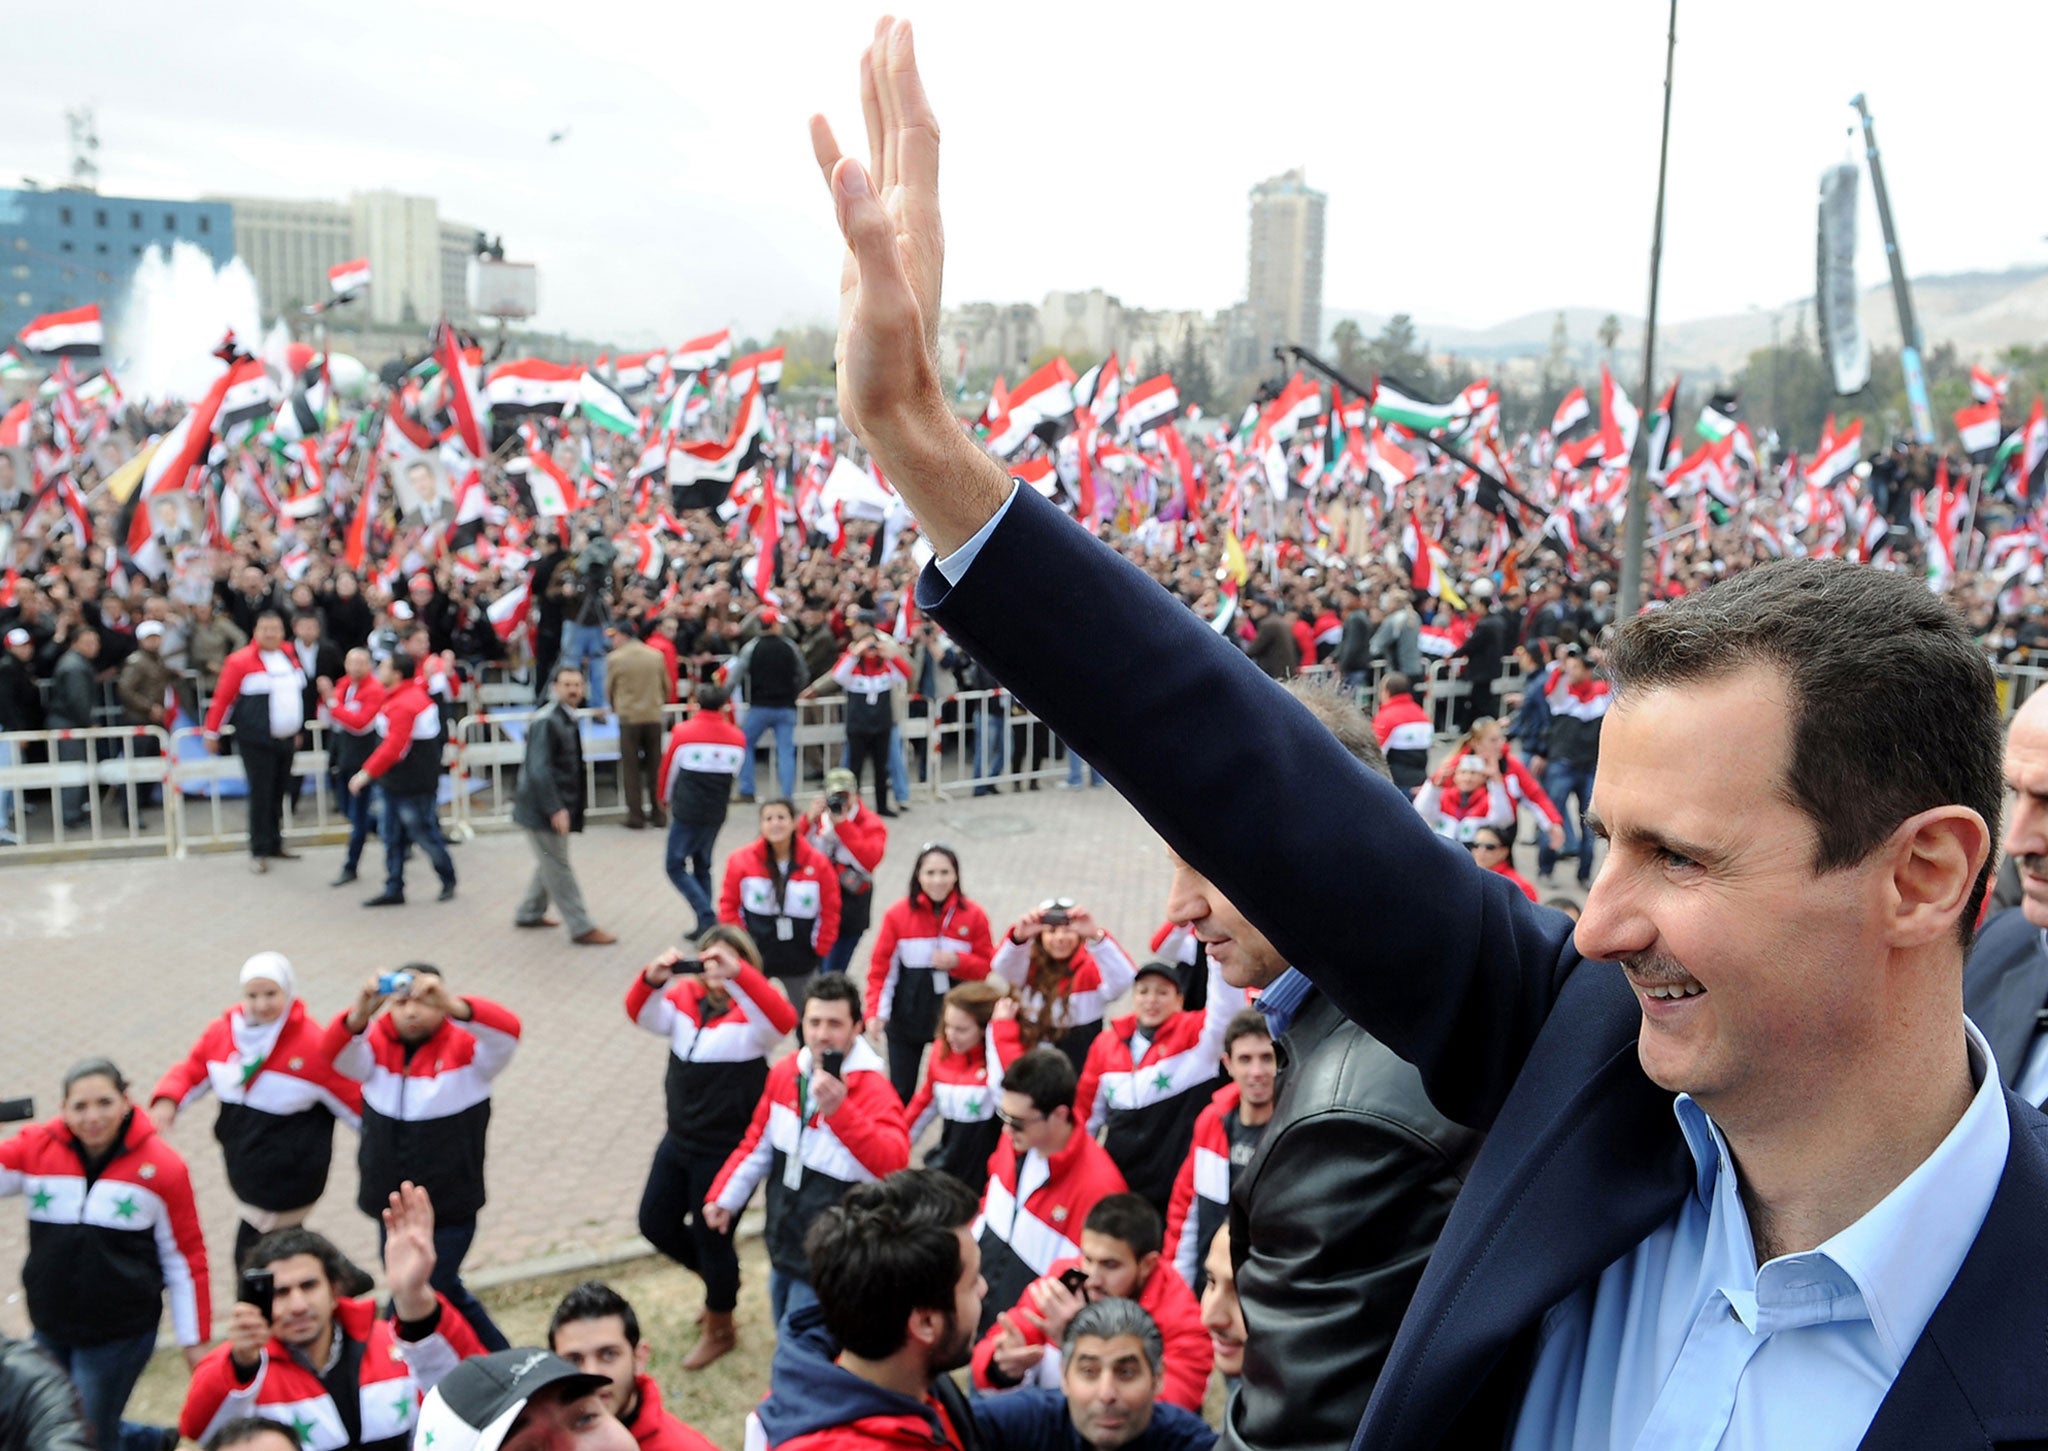 President Assad during a rare public appearance in January 2012